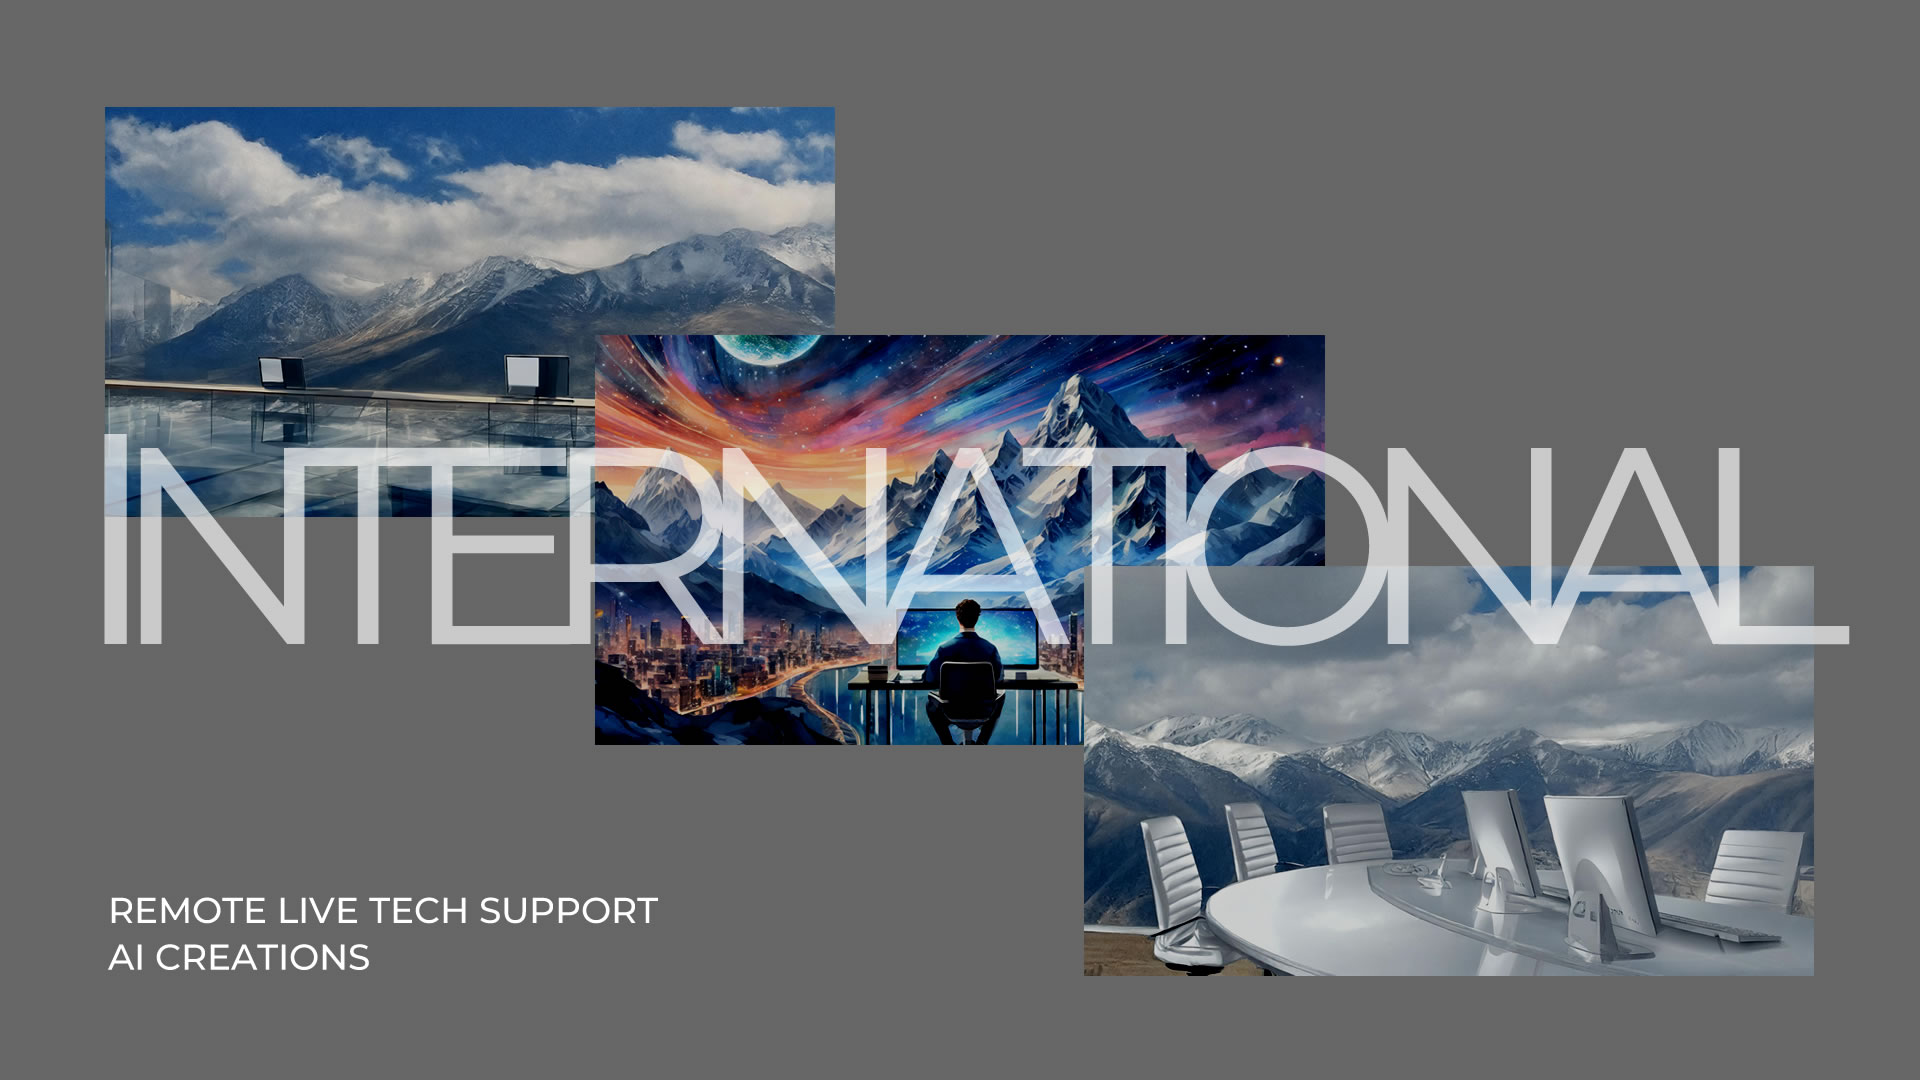 INTELLIGENCE | Remote Tech Support, AI Creations from 7000 feet